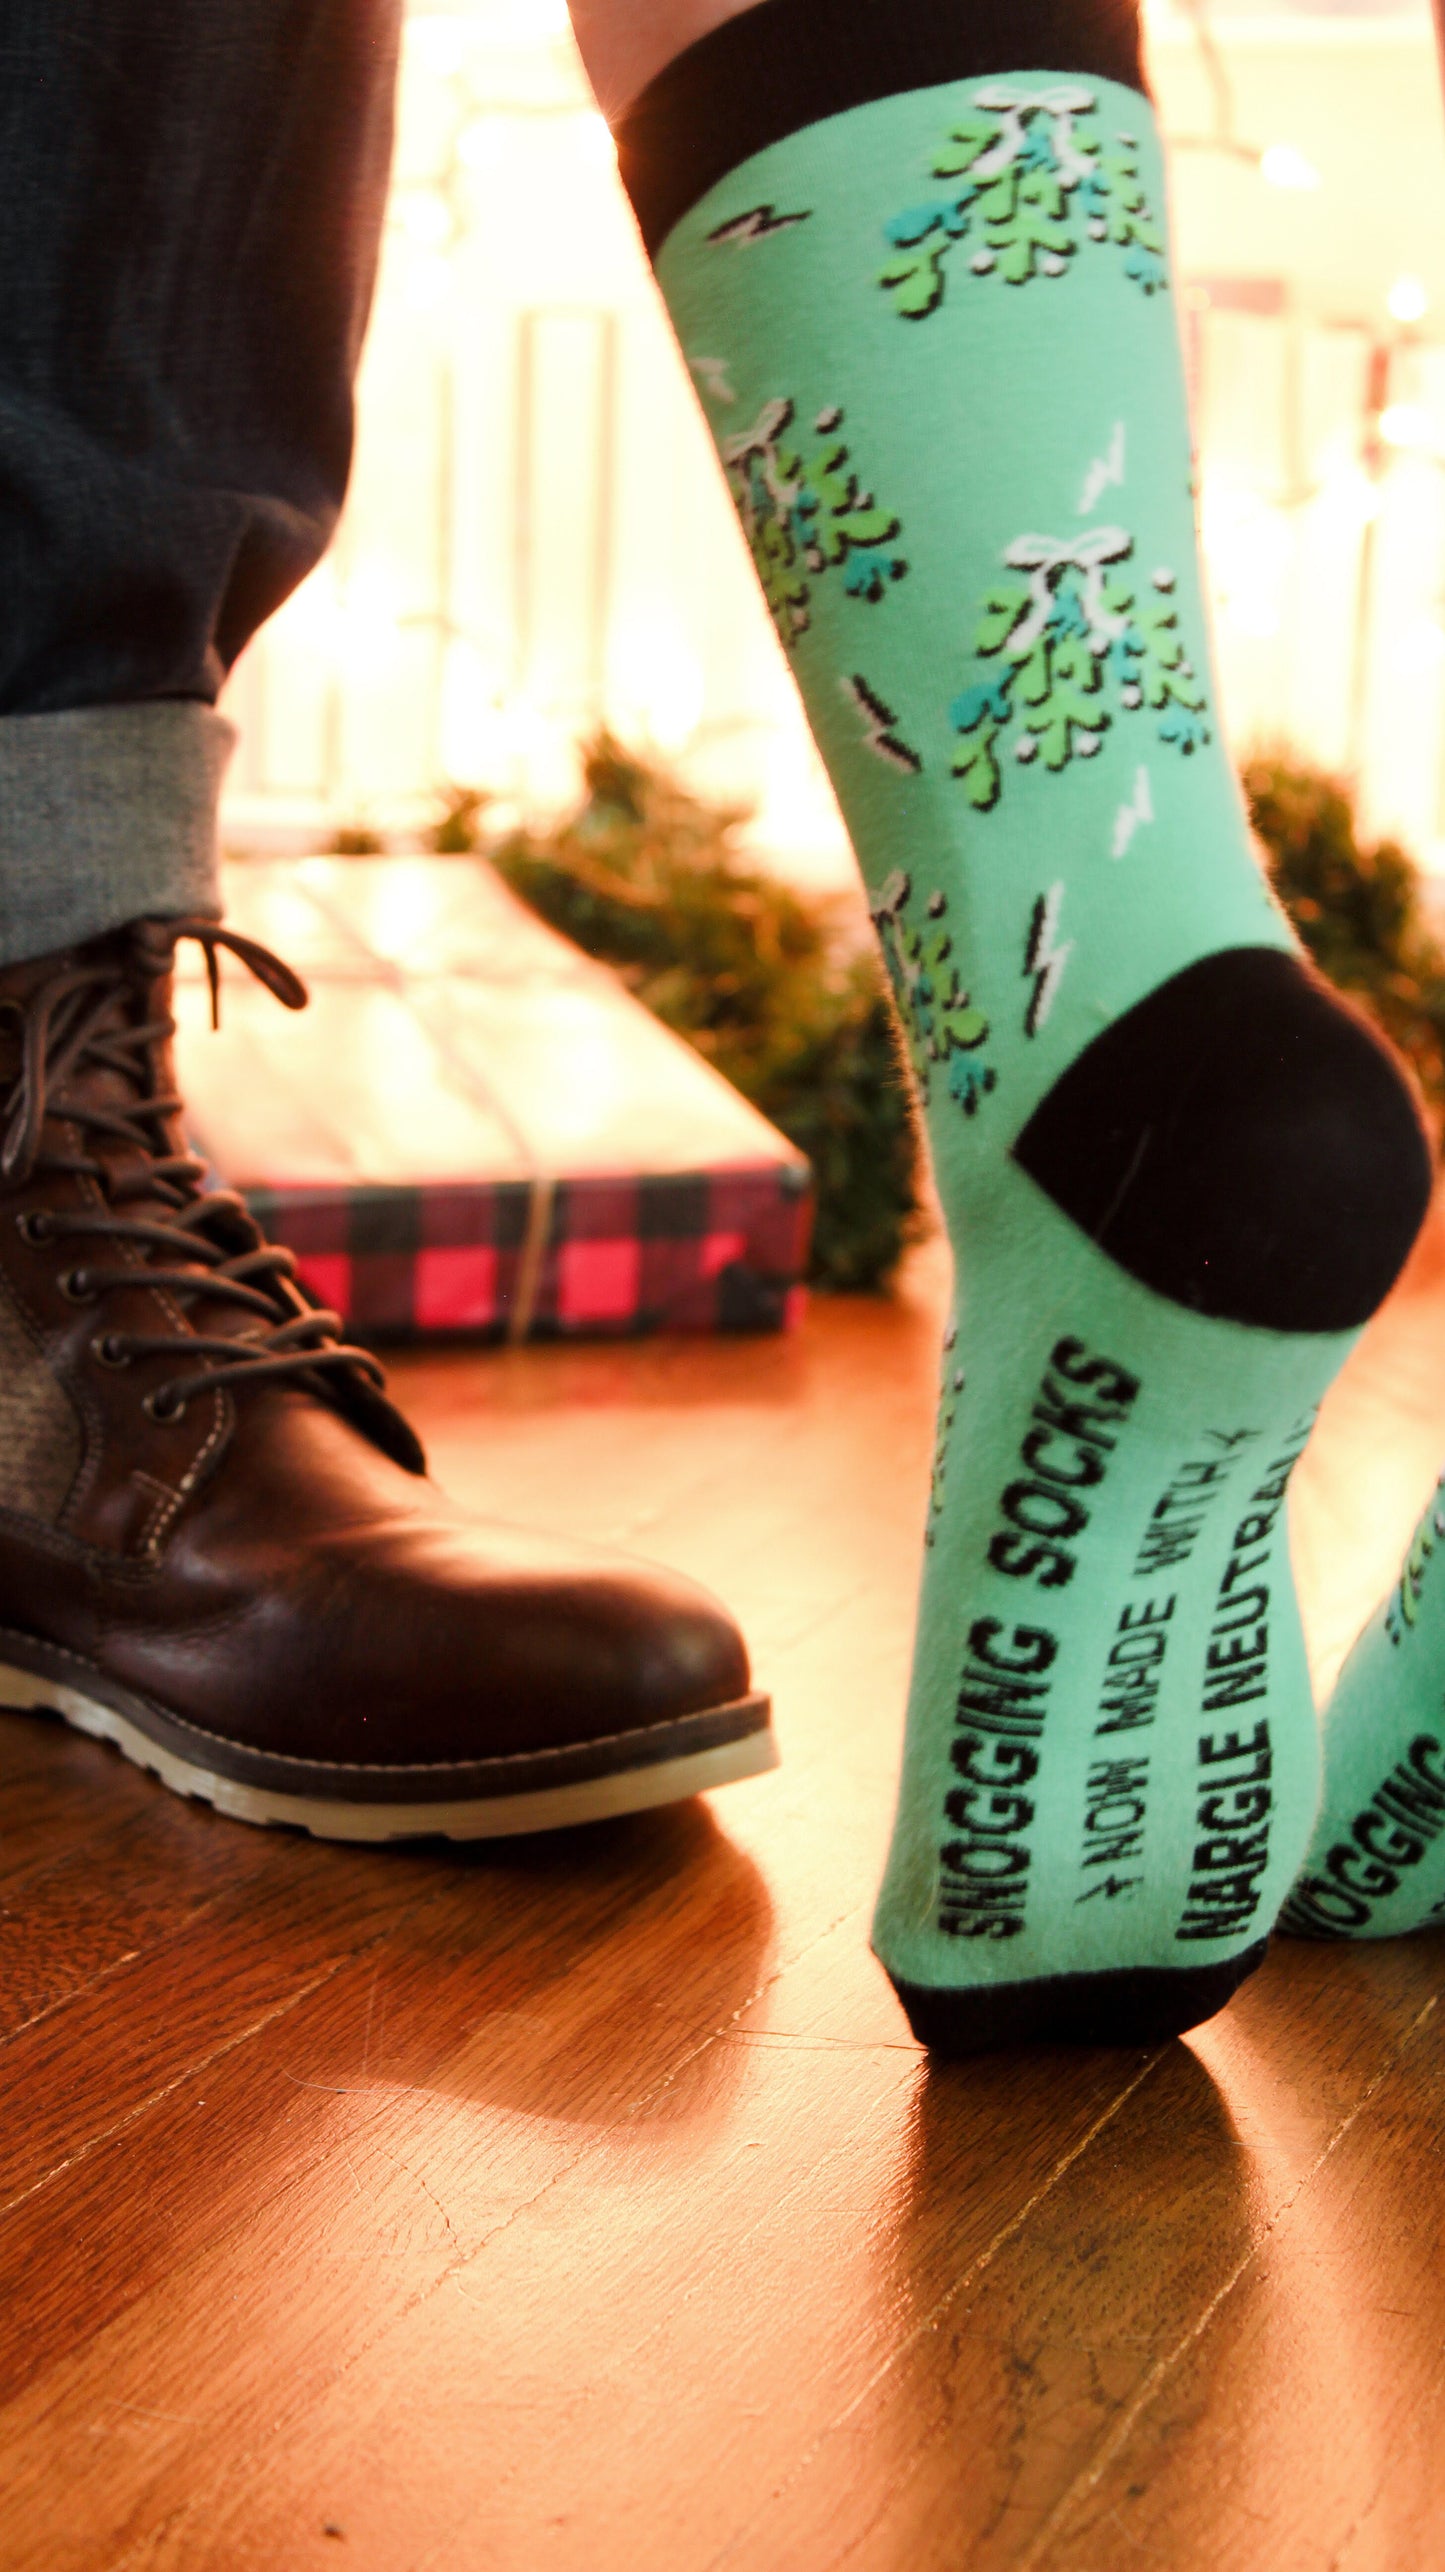 Mistletoe with nargles on green and black socks from weasley's wizard wheezes